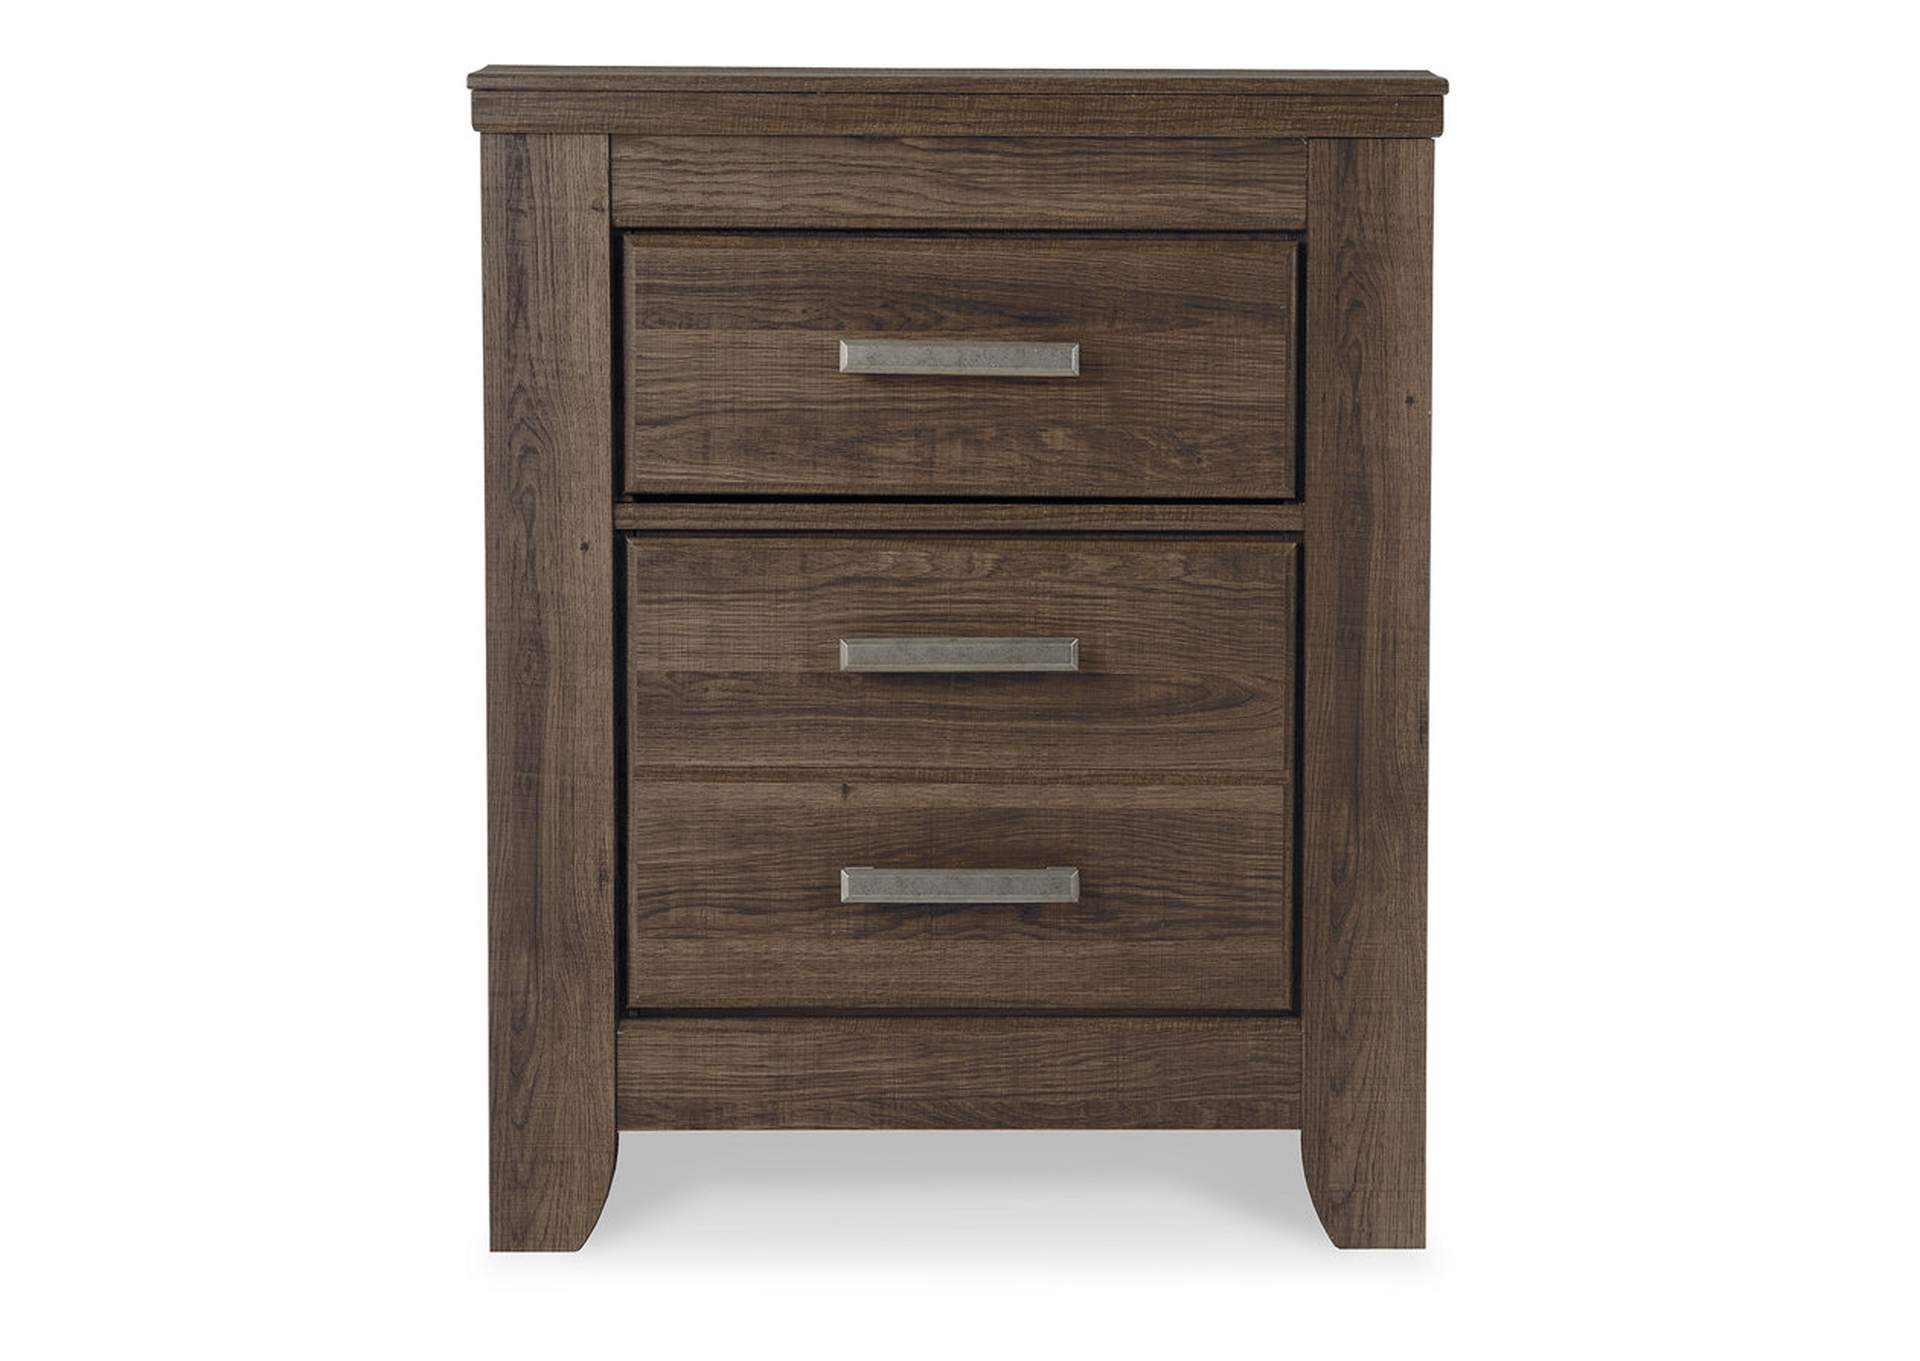 Juararo Queen Poster Bed, Dresser, Mirror, Chest and 2 Nightstands,Signature Design By Ashley